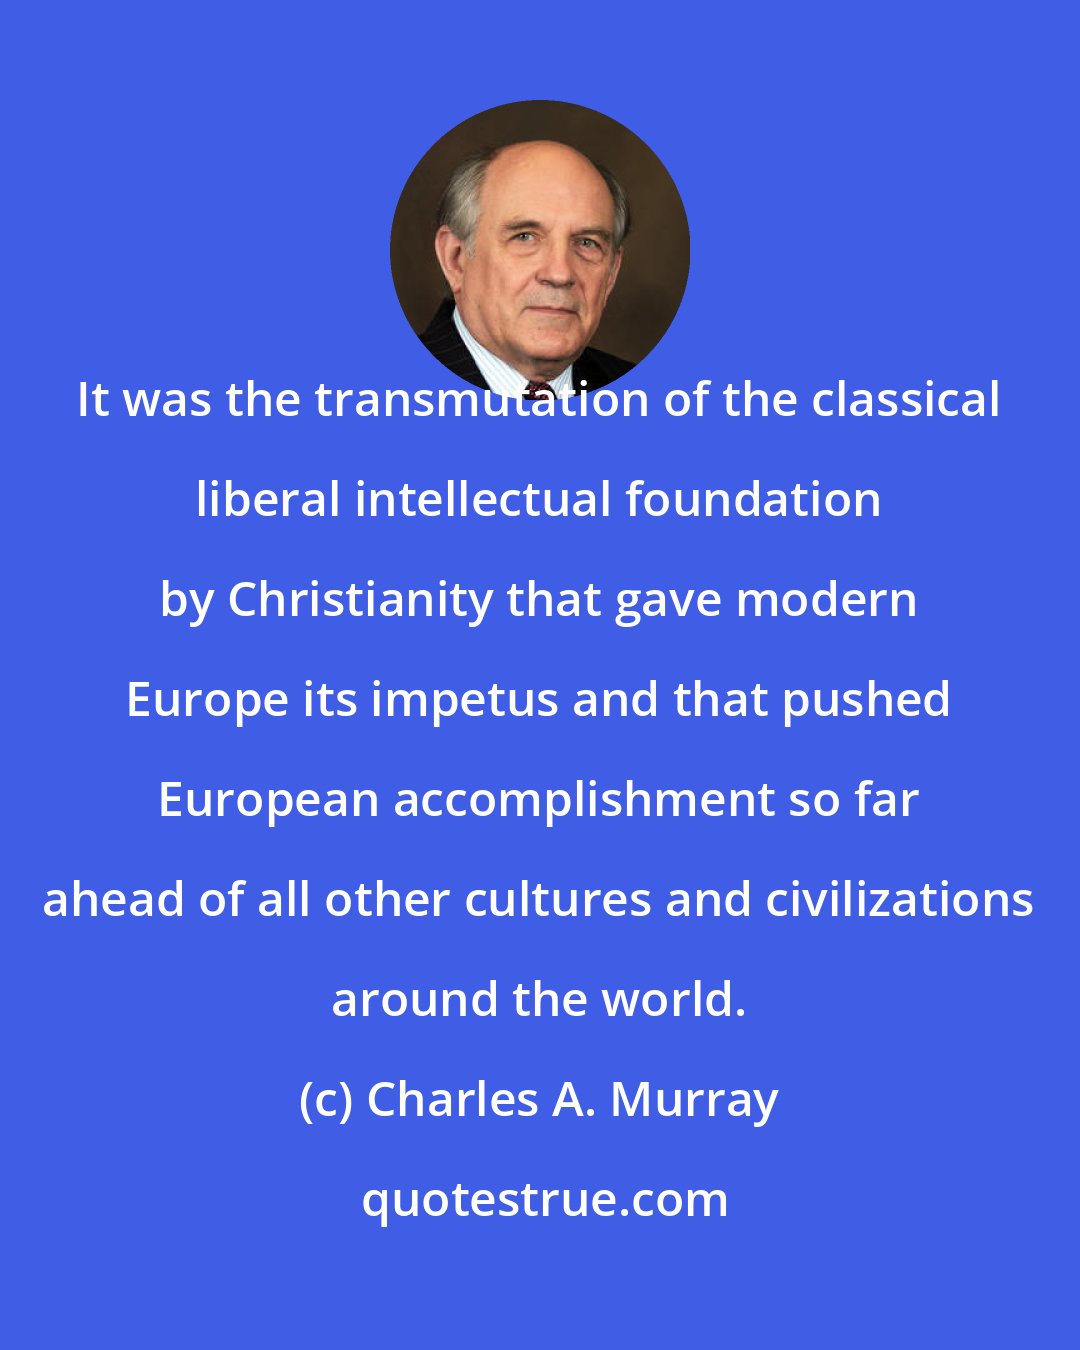 Charles A. Murray: It was the transmutation of the classical liberal intellectual foundation by Christianity that gave modern Europe its impetus and that pushed European accomplishment so far ahead of all other cultures and civilizations around the world.